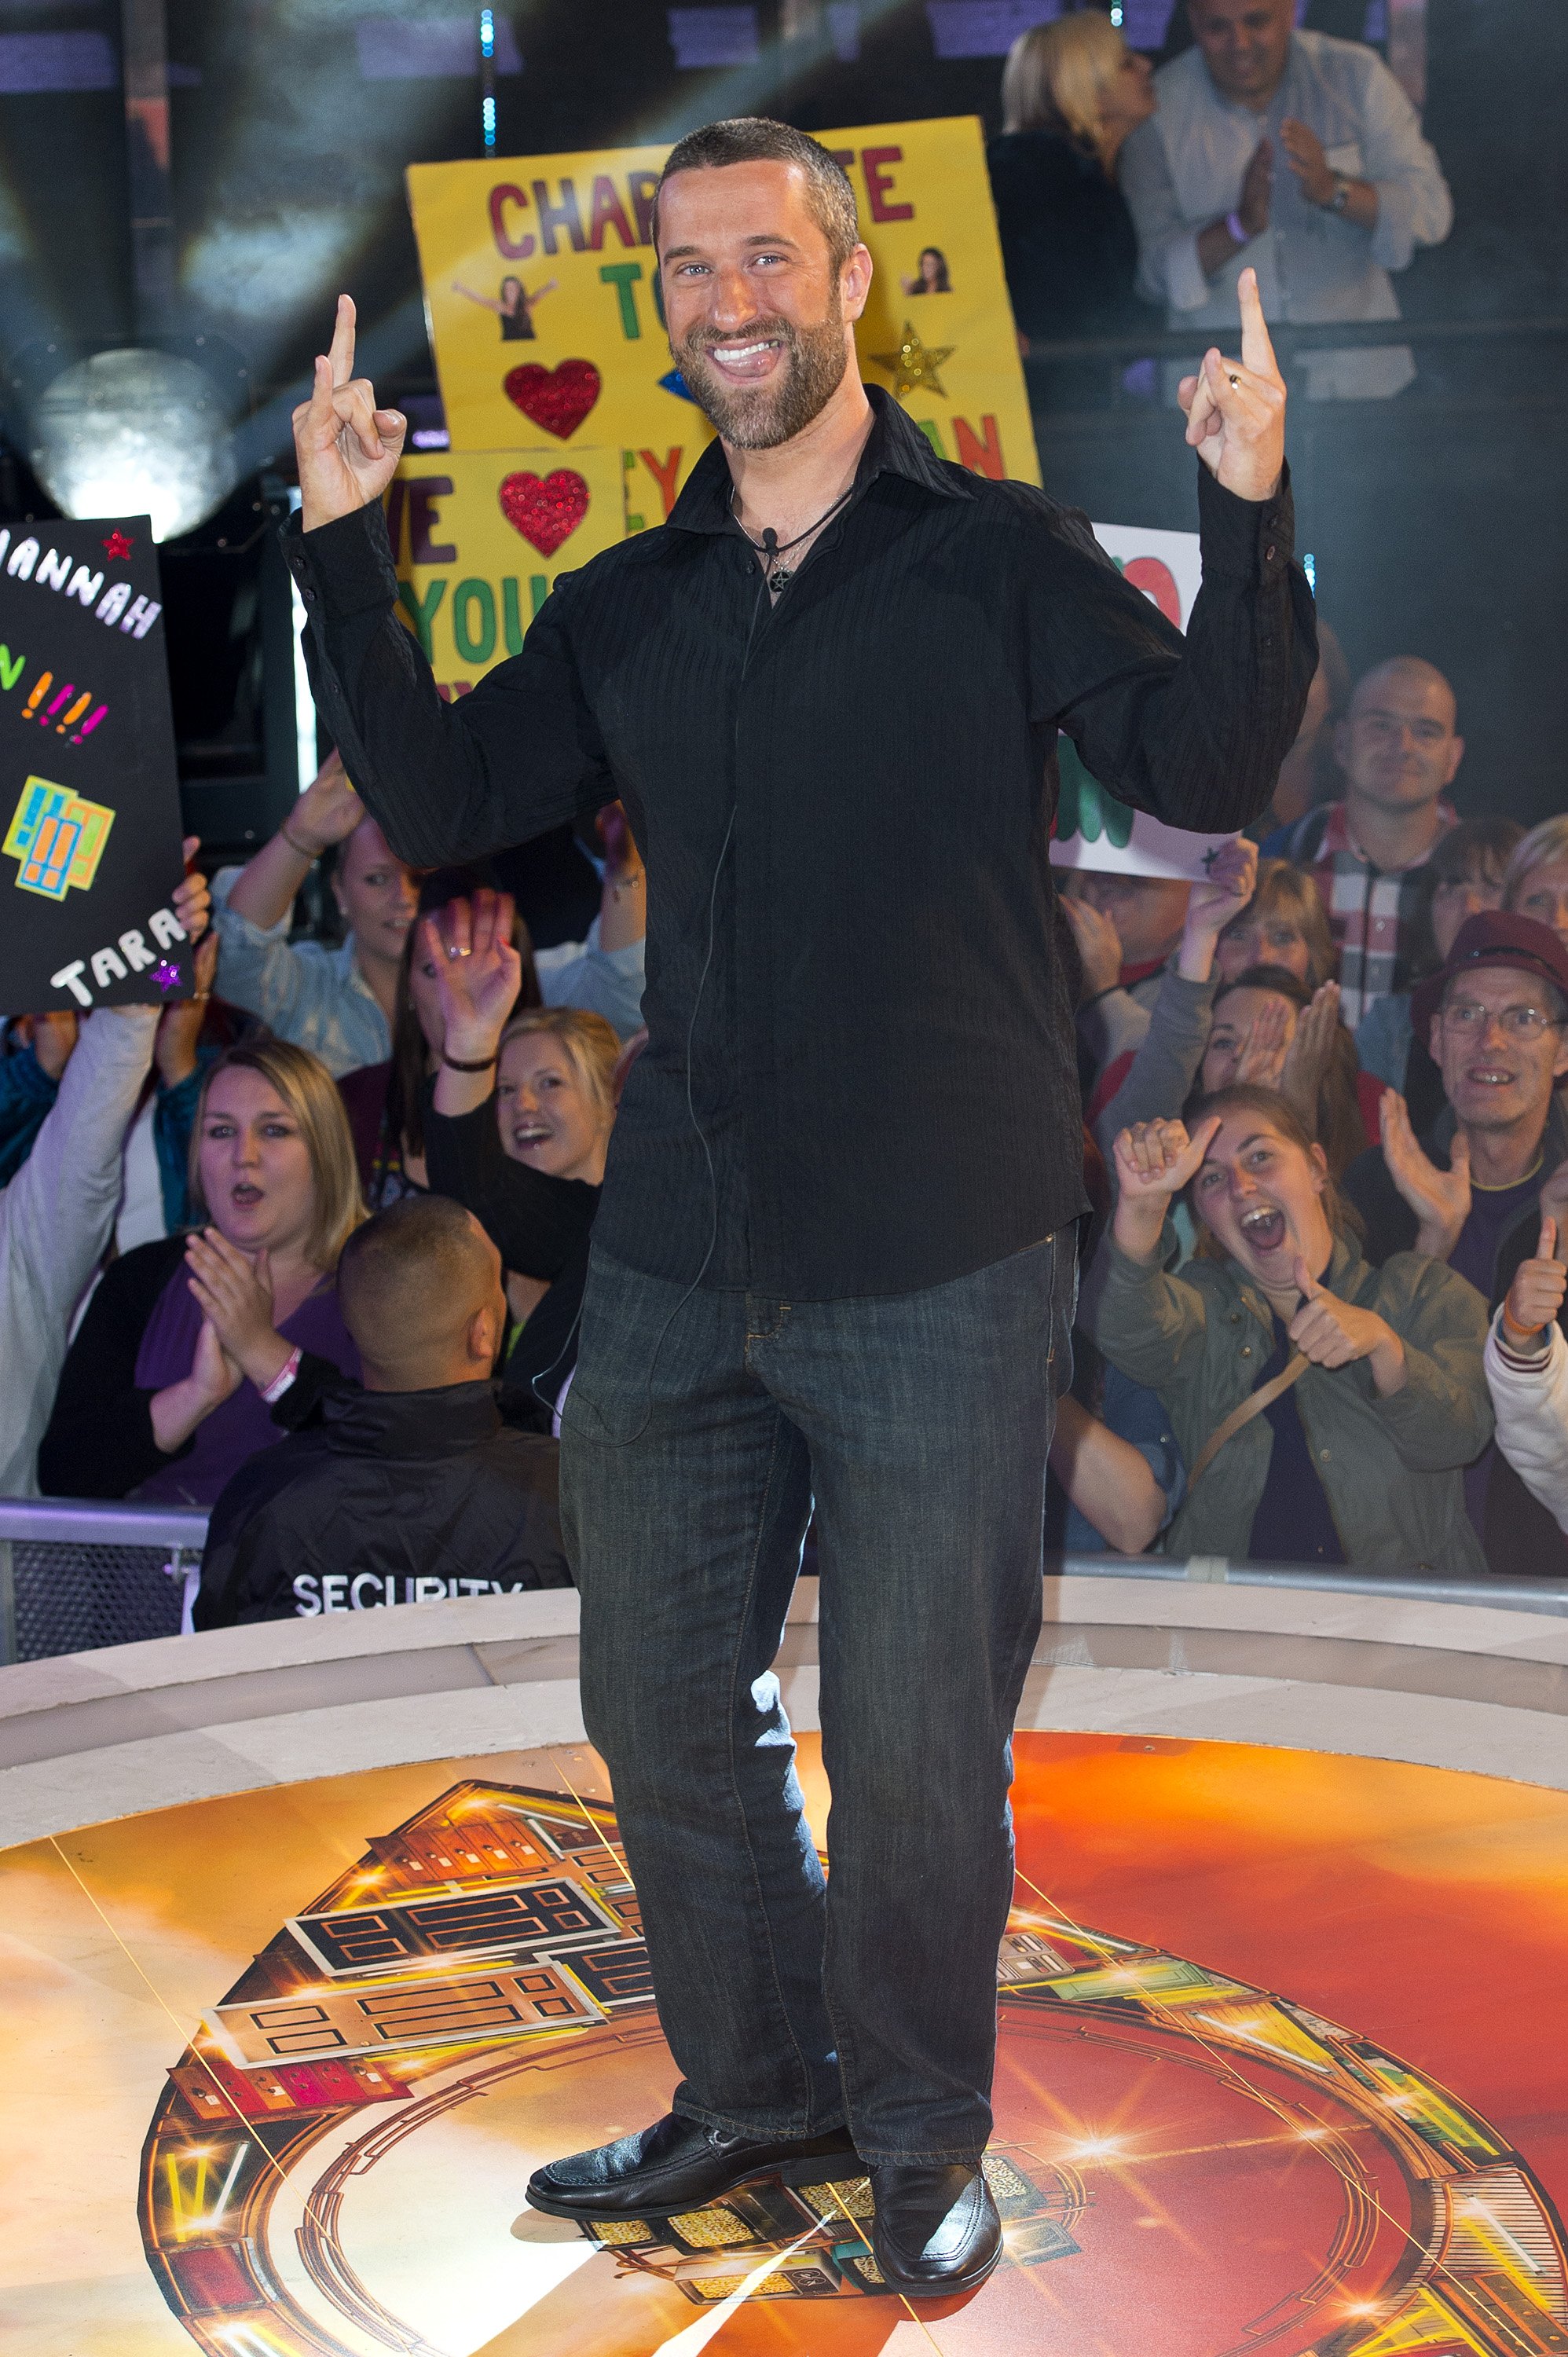 Dustin Diamond at his eviction ceremony from "The Celebrity Big Brother" house, England, September 2013. | Photo: Getty Images.